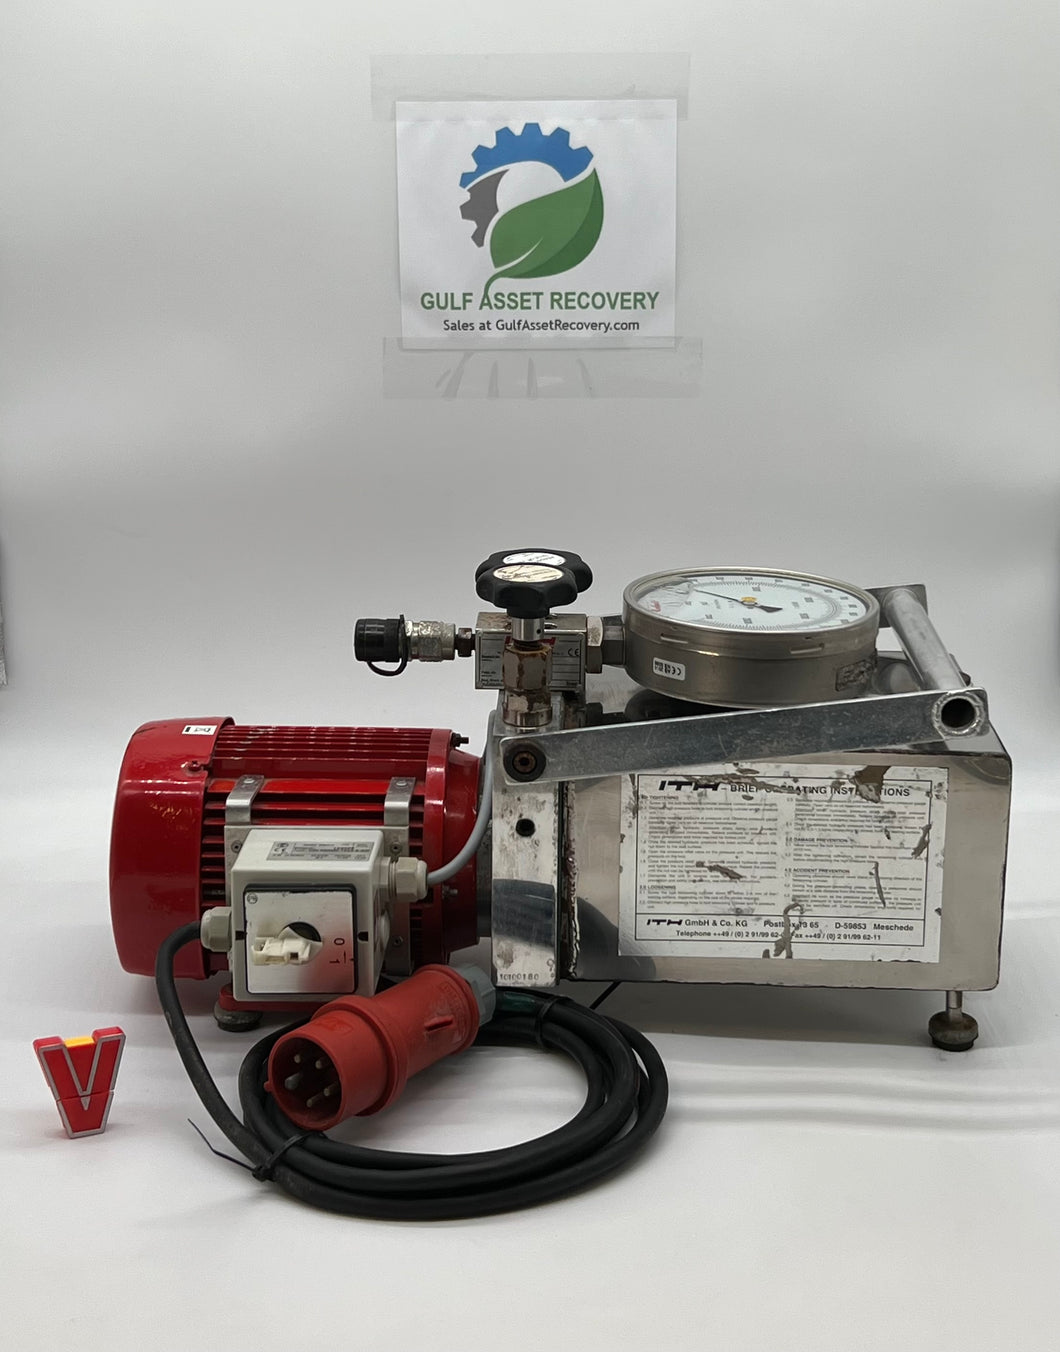 ITH Eco-MAX 17 Portable Electric Hydraulic High Pressure Pump Power Unit (Used)